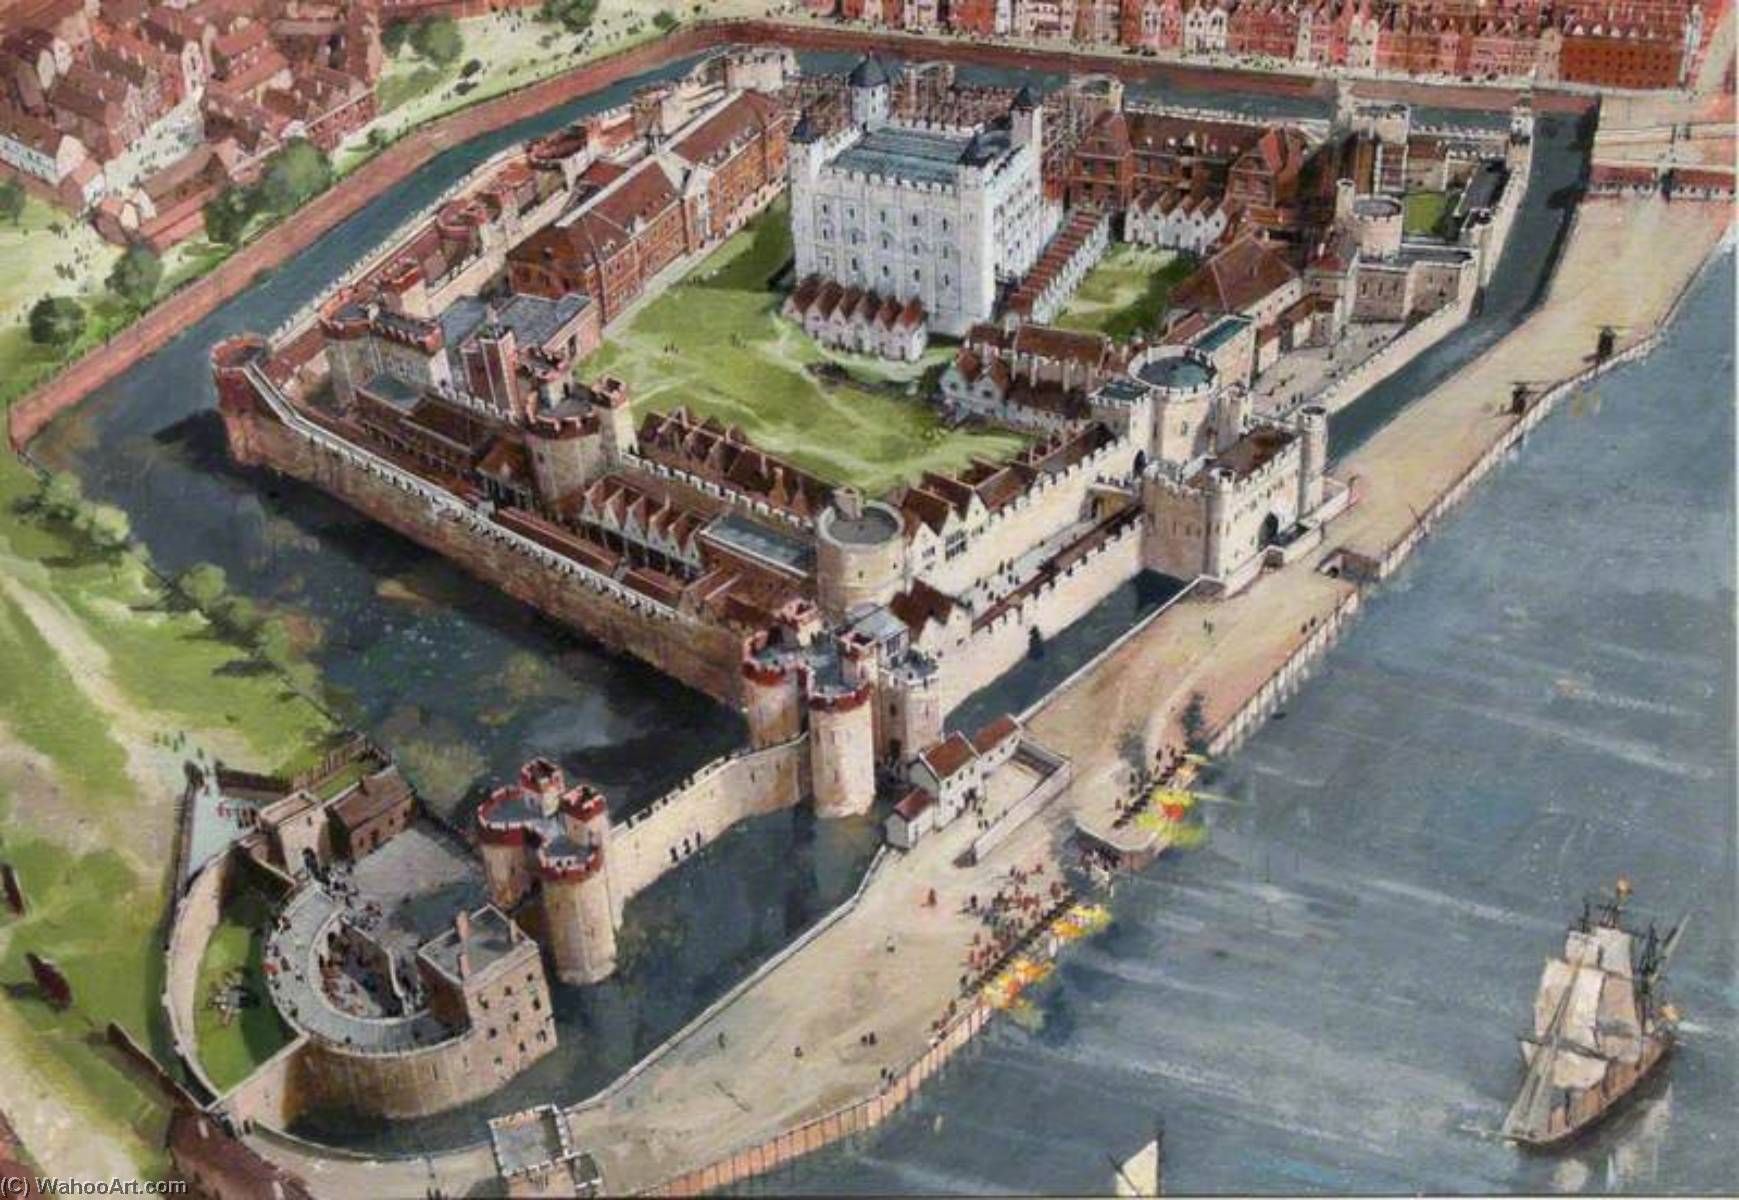 WikiOO.org - Encyclopedia of Fine Arts - Malba, Artwork Ivan Lapper - Artist's Impression of the Tower of London Site, 1700